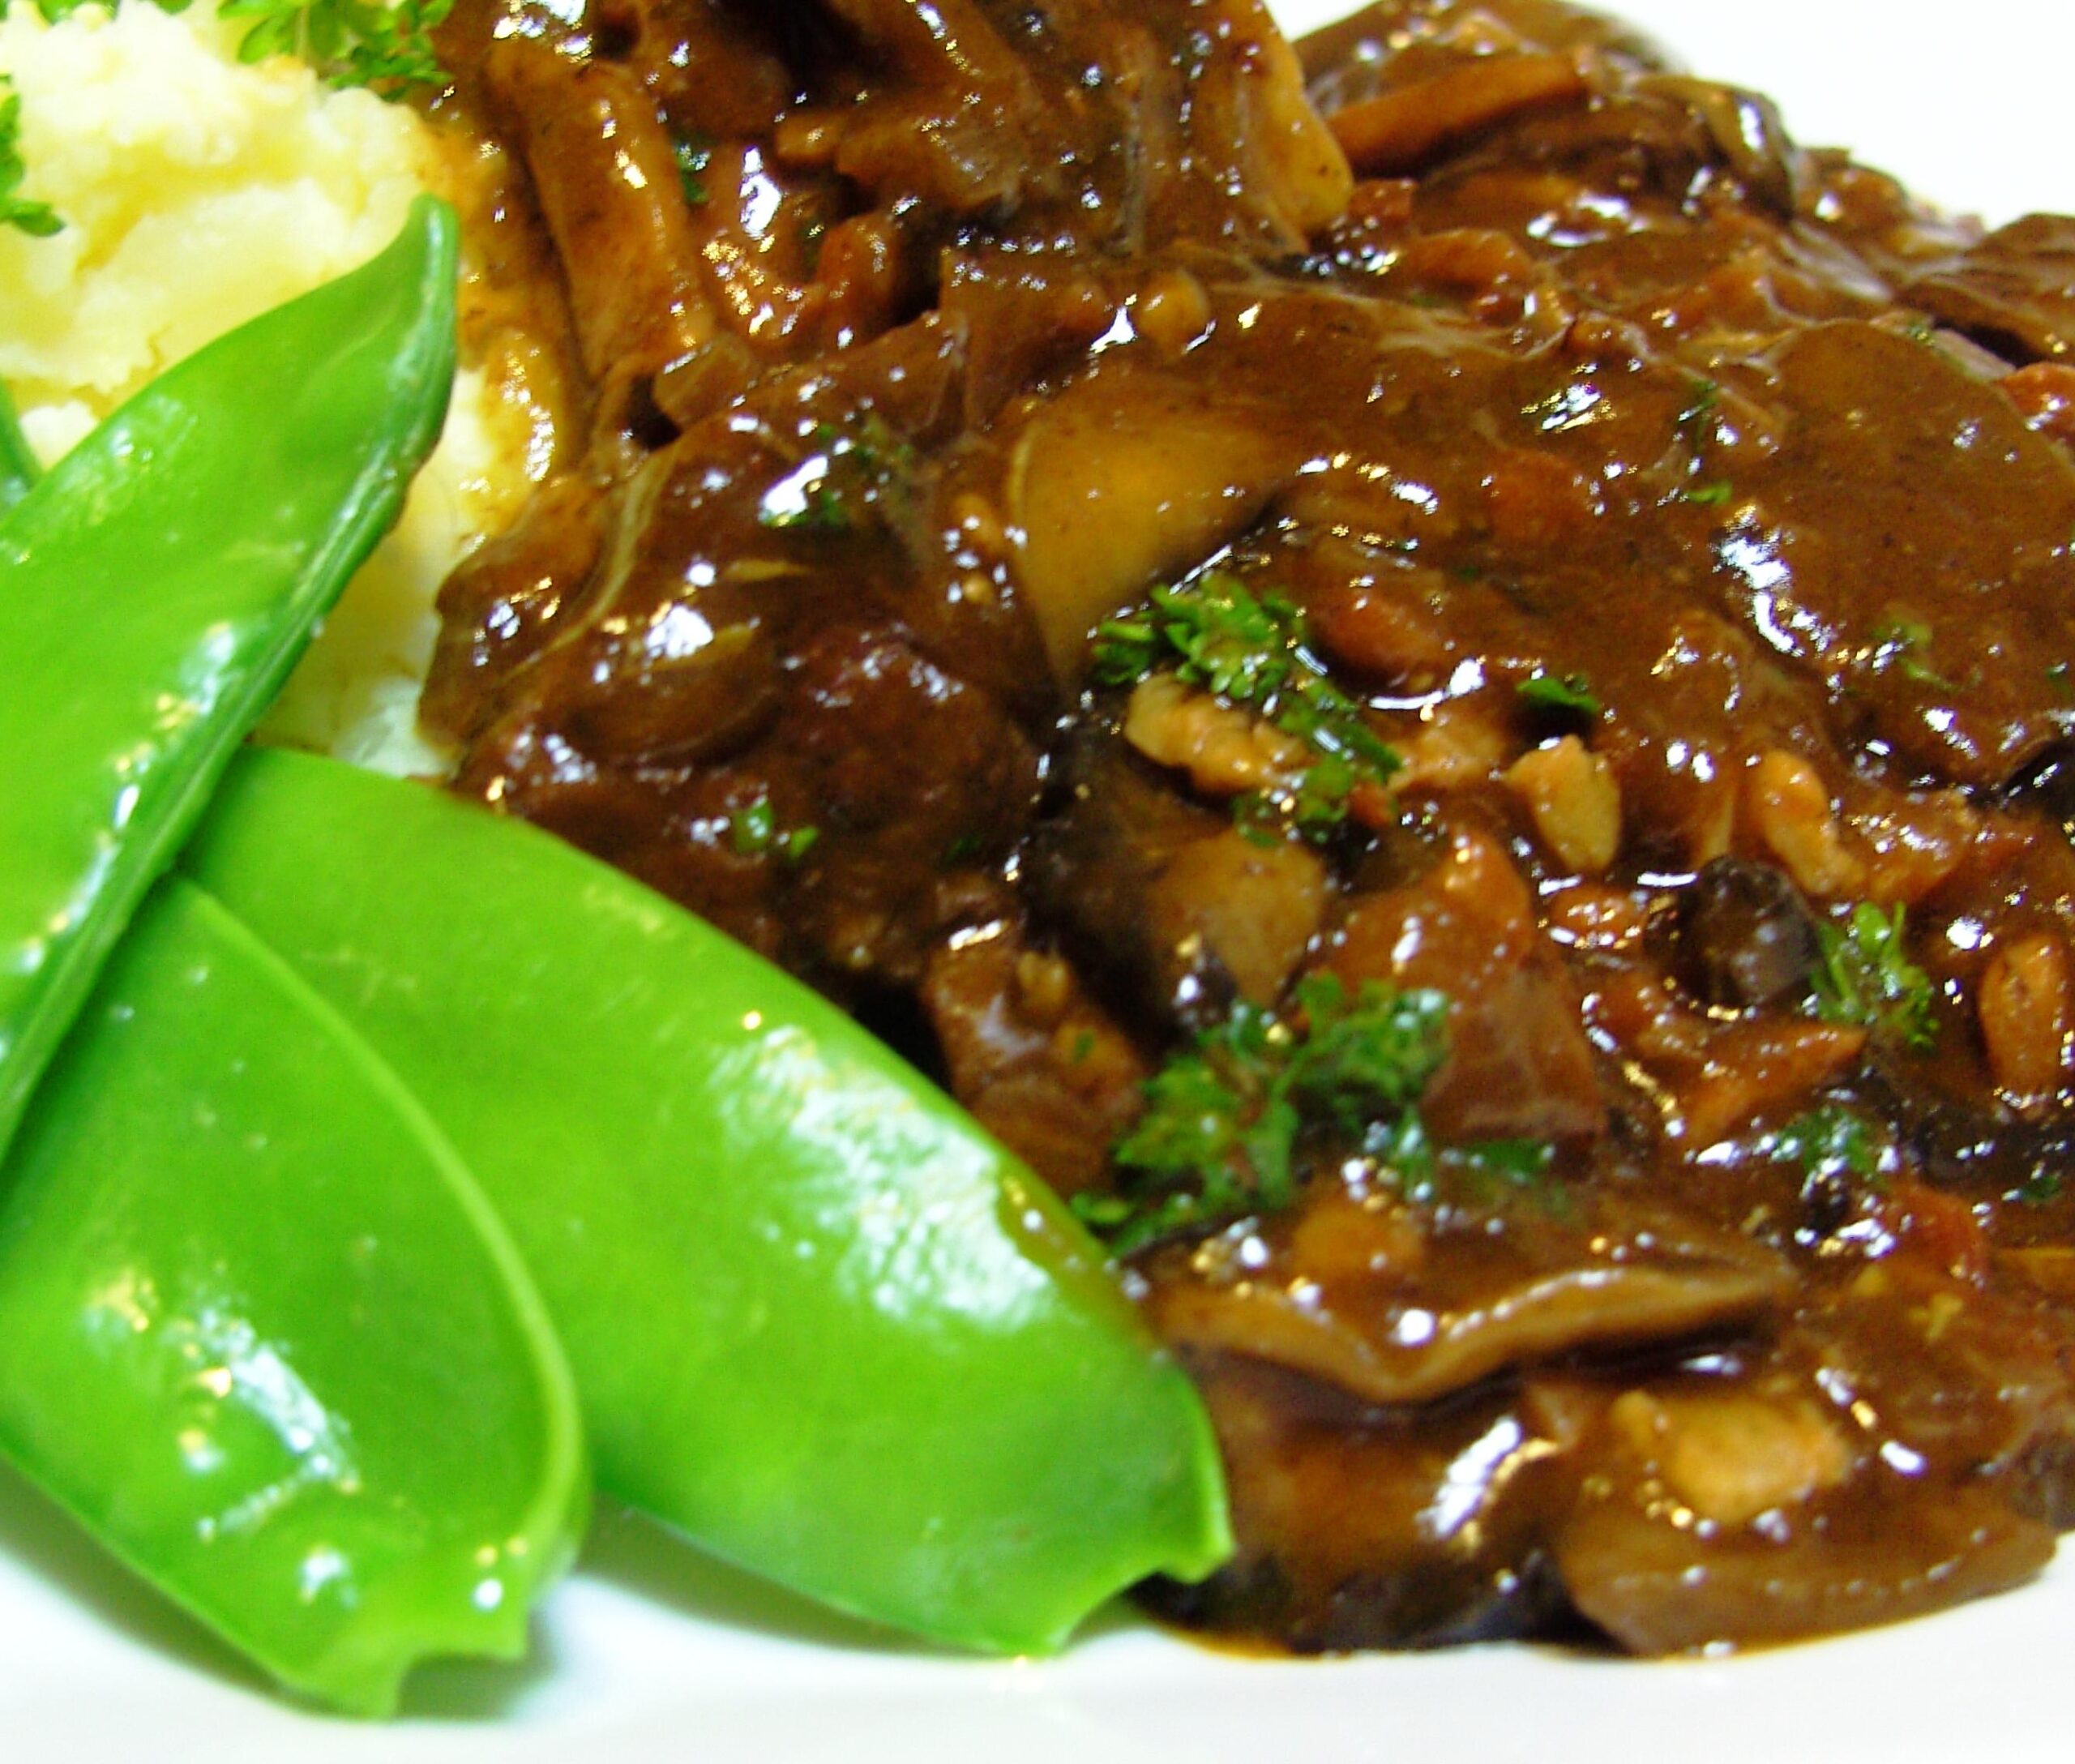  Get ready for a burst of flavor with this beef and mushrooms in red wine sauce!